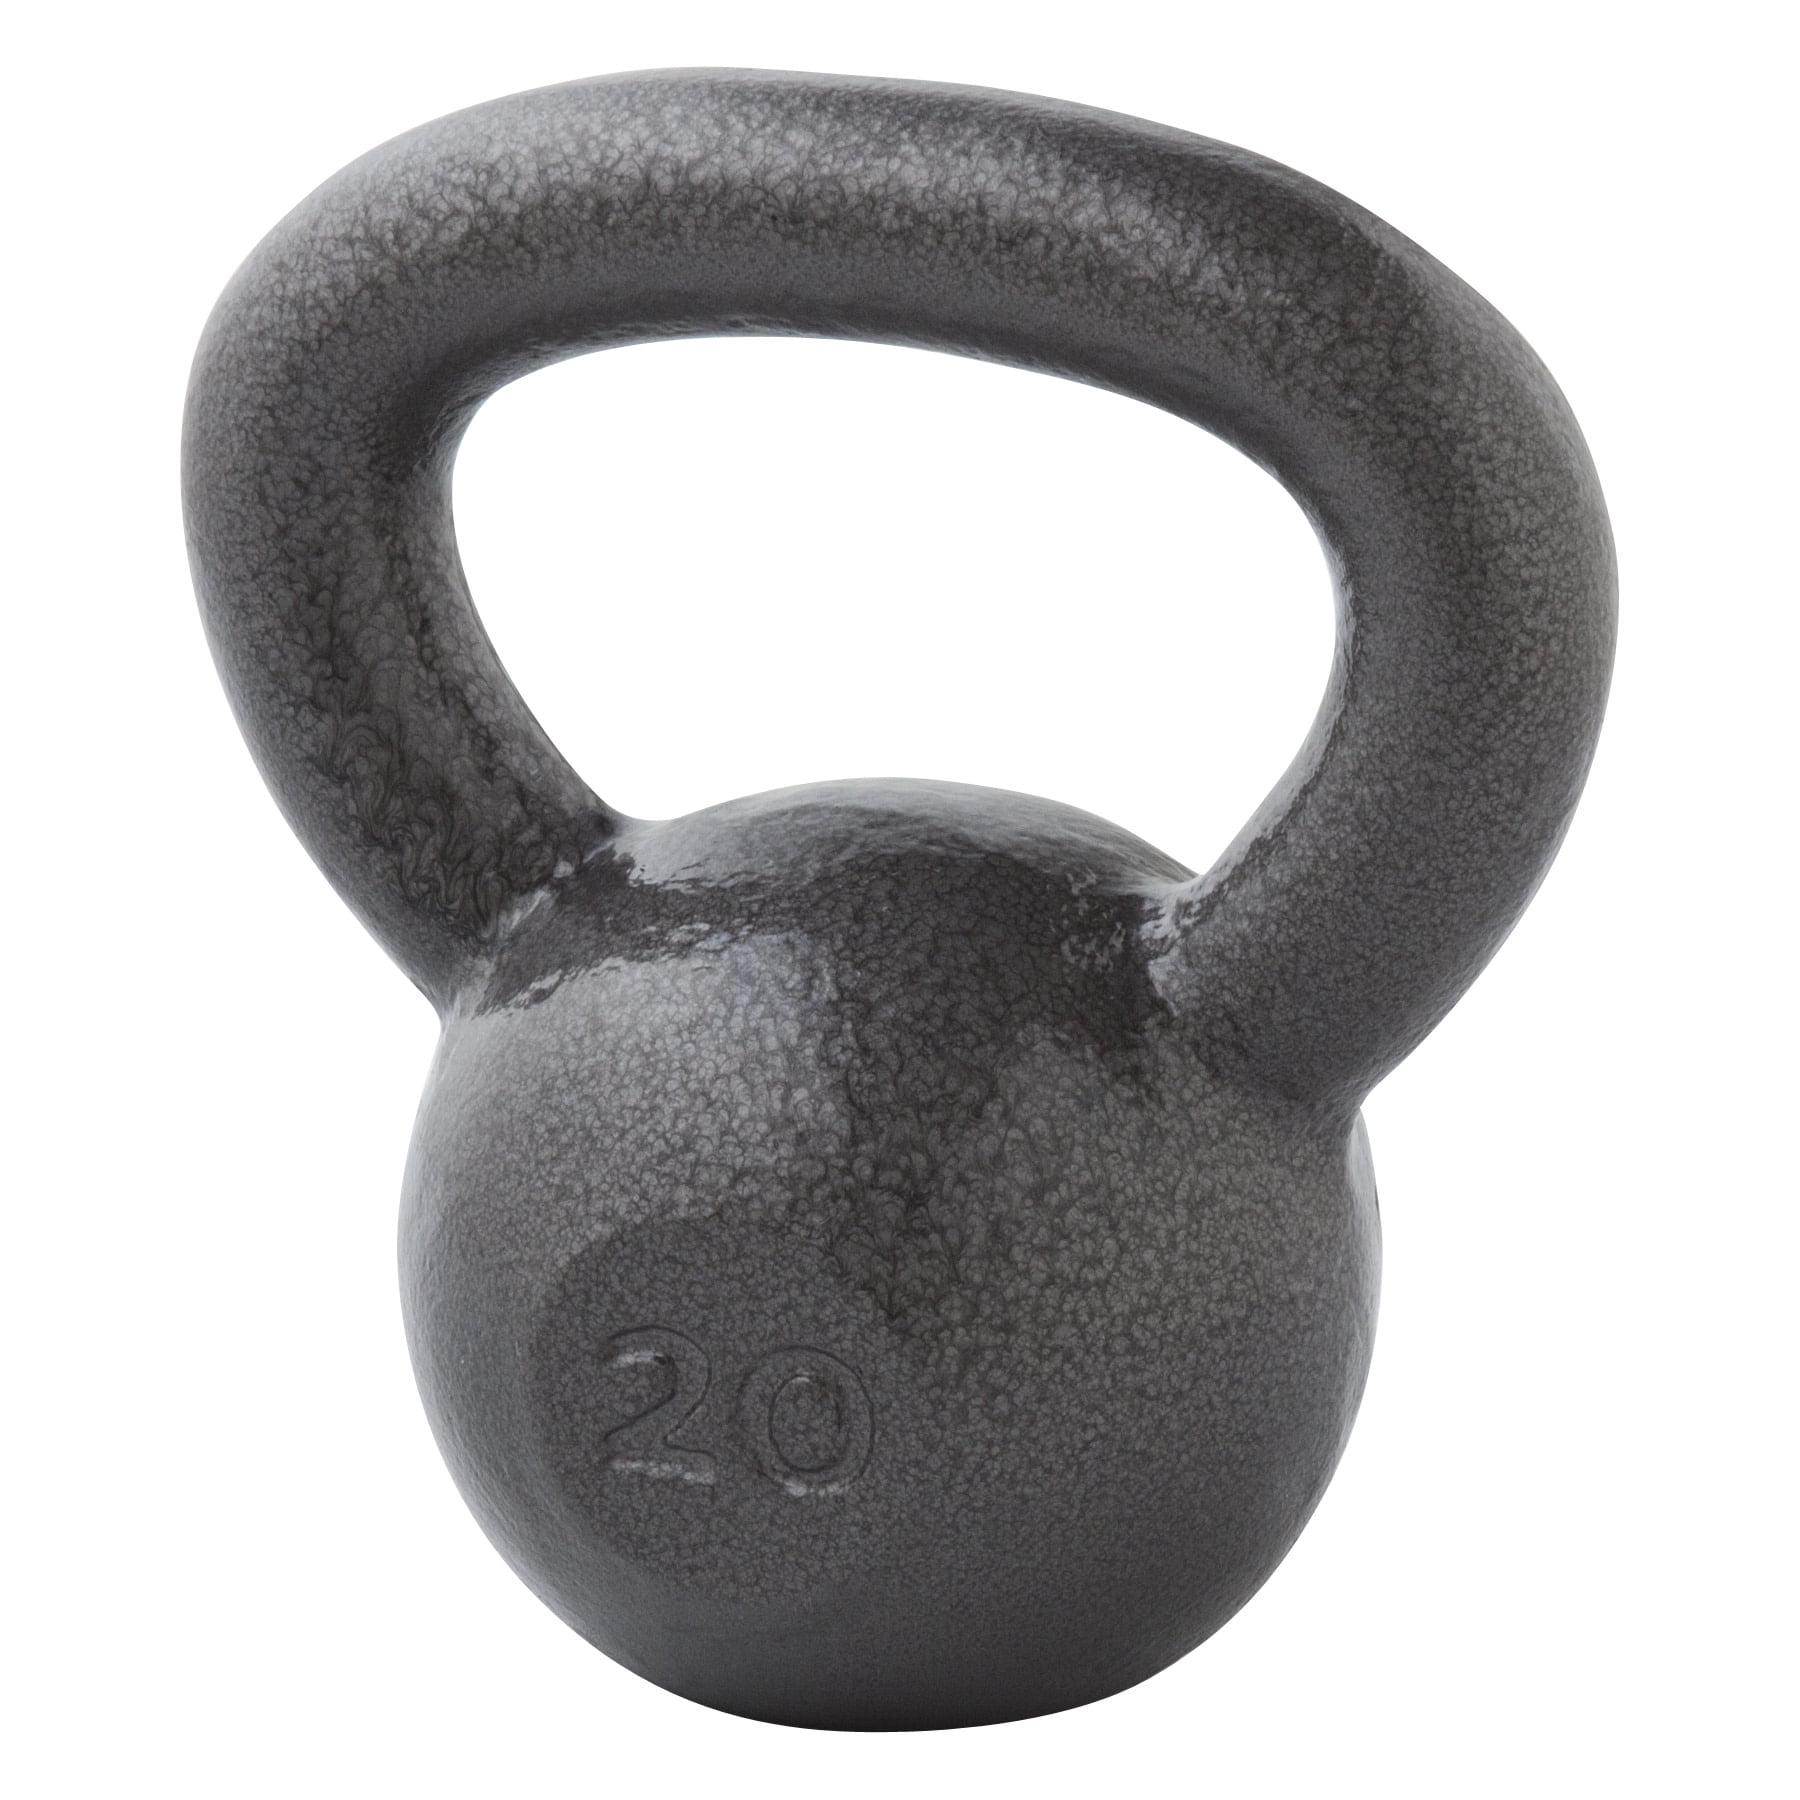 44 lb 20kg/Red Diamond Pro Kettle Bell E-Coated Russian Kettlebell Weights